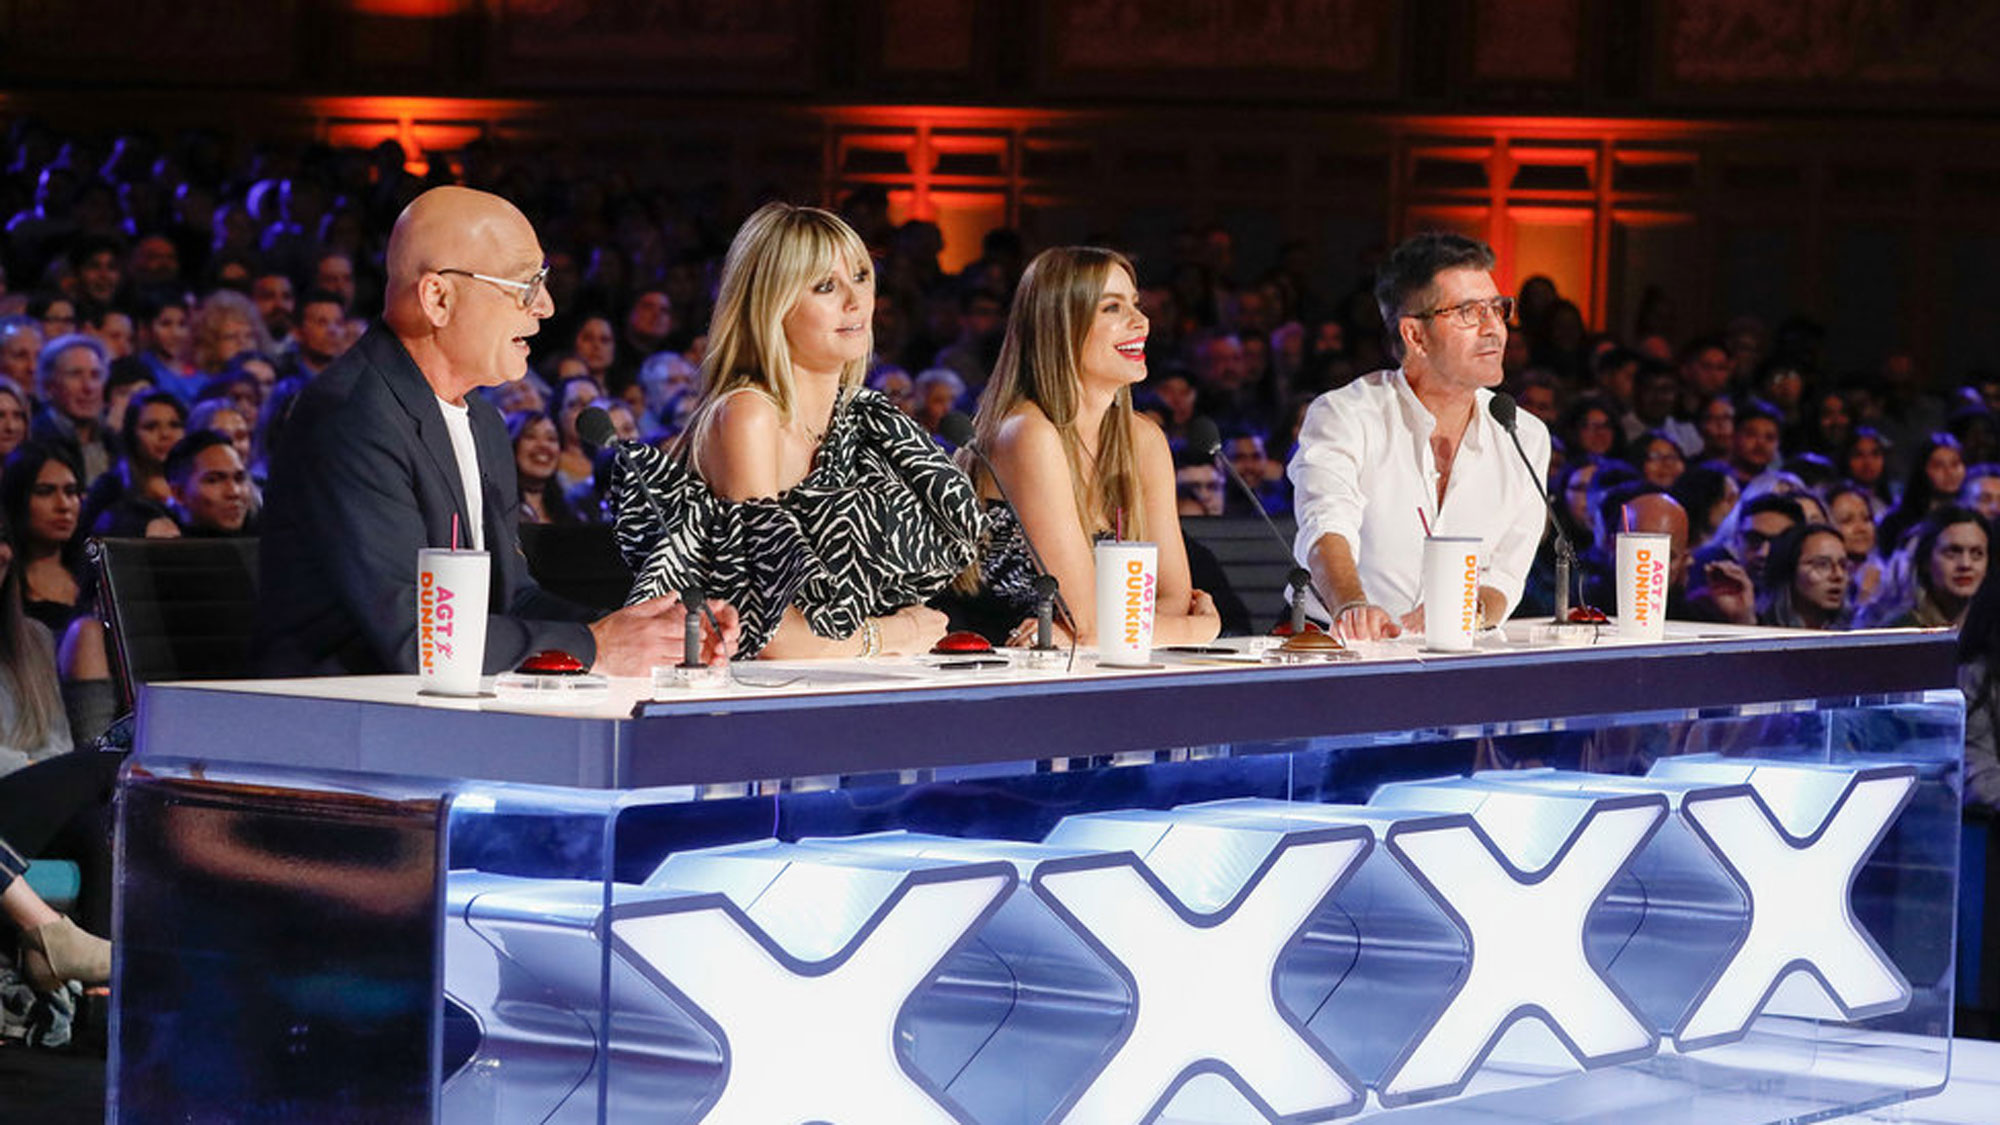 How to watch America's Got Talent 2020 Season 15 live shows, results